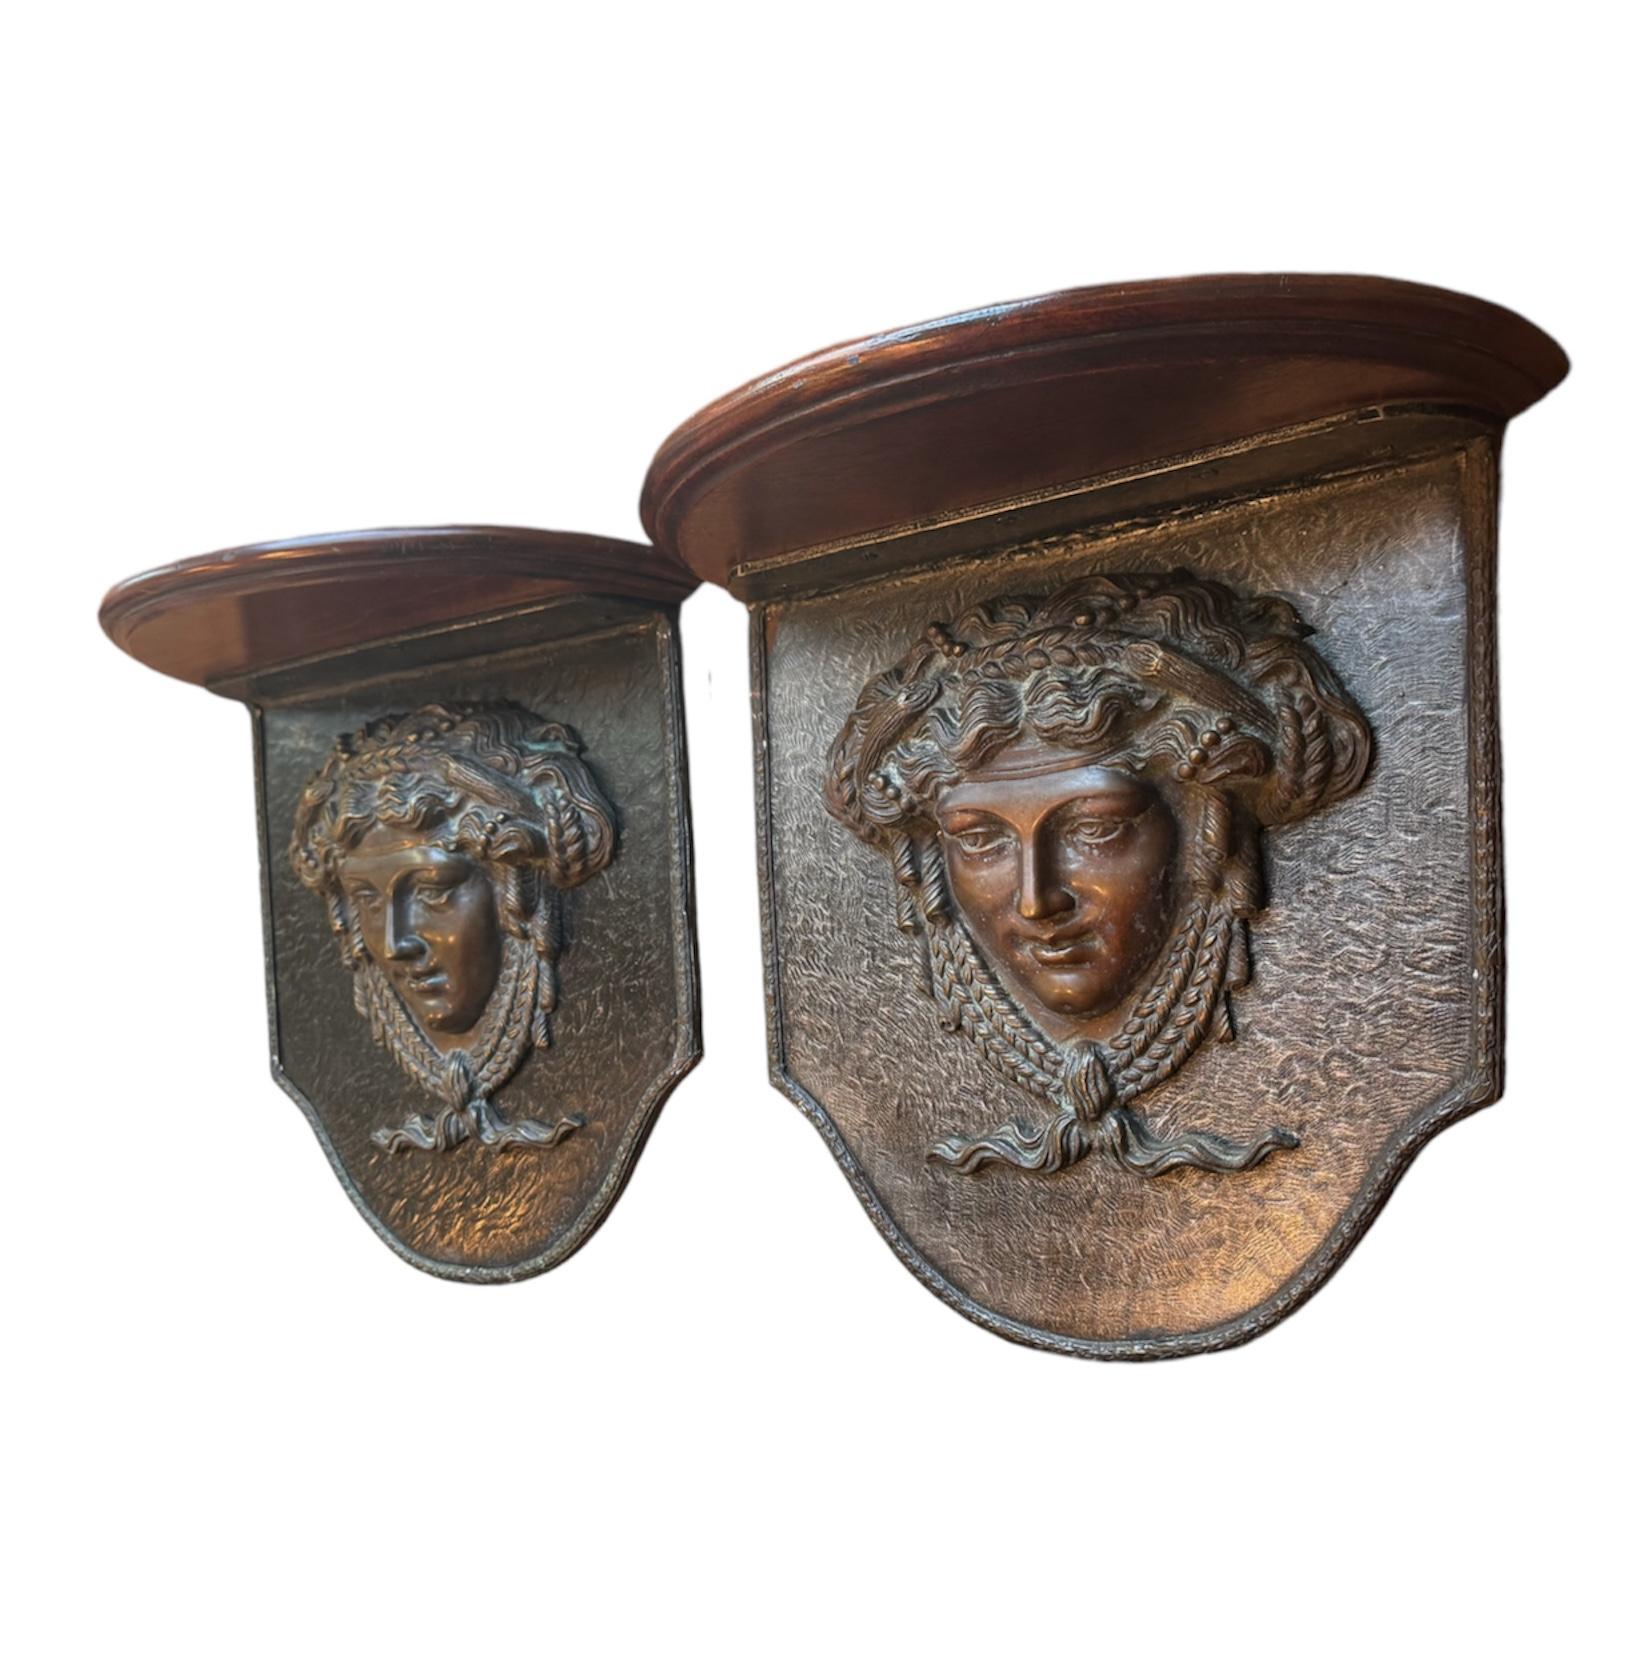 Introducing a pair of exquisite Versace-style wall corbels, an embodiment of luxury and classical beauty designed to elevate the aesthetic of any room. These rare pieces feature solid bronze Medusa heads, a hallmark of opulence and intricate